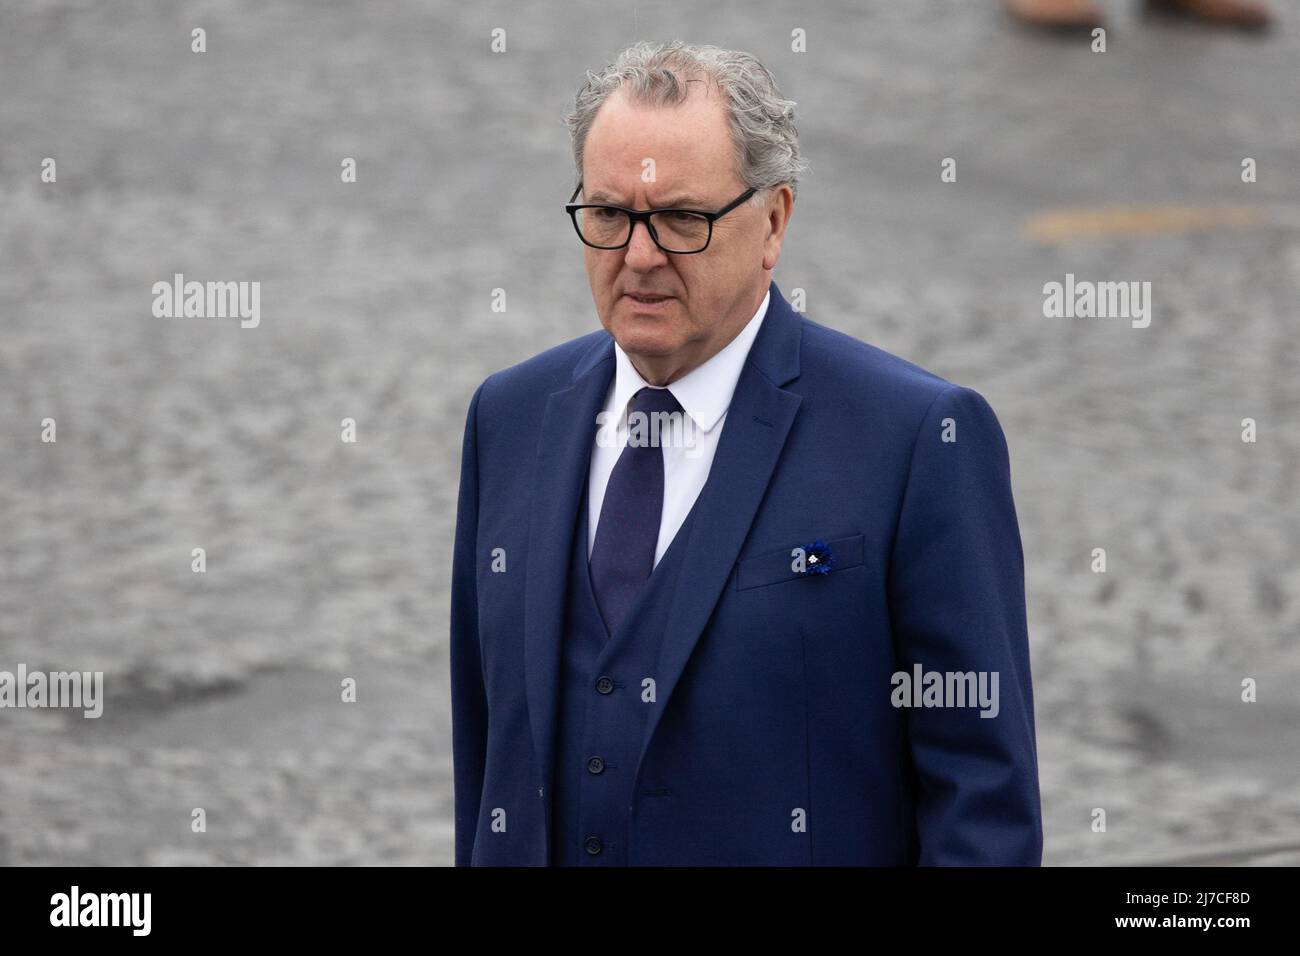 Paris, France, May 8, 2022, President of the French National Assembly Richard Ferrand attends, at the Arc de Triomphe, the ceremony marking the Allied victory against Nazi Germany and the end of World War II in Europe (VE Day), in Paris on May 8, 2022. Photo by Raphael Lafargue/ABACAPRESS.COM Stock Photo